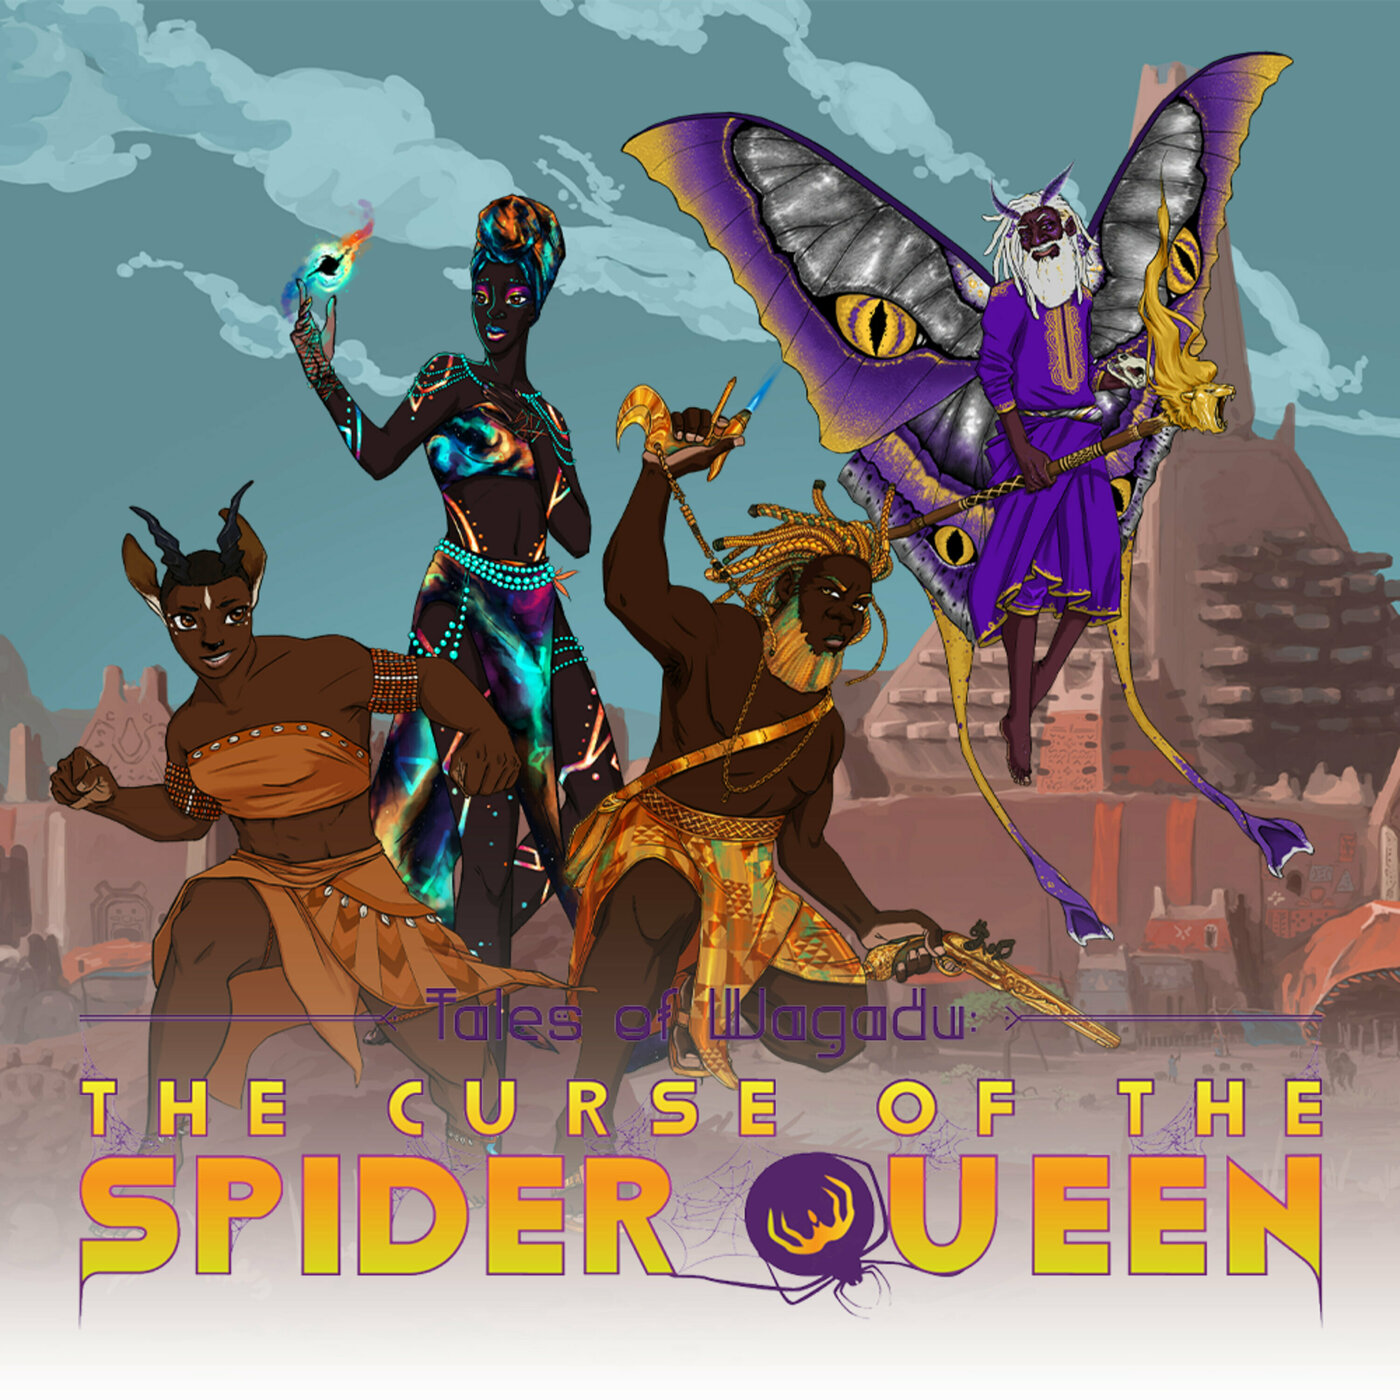 Tales of Wagadu: The Curse of the Spider Queen Ep. 16 